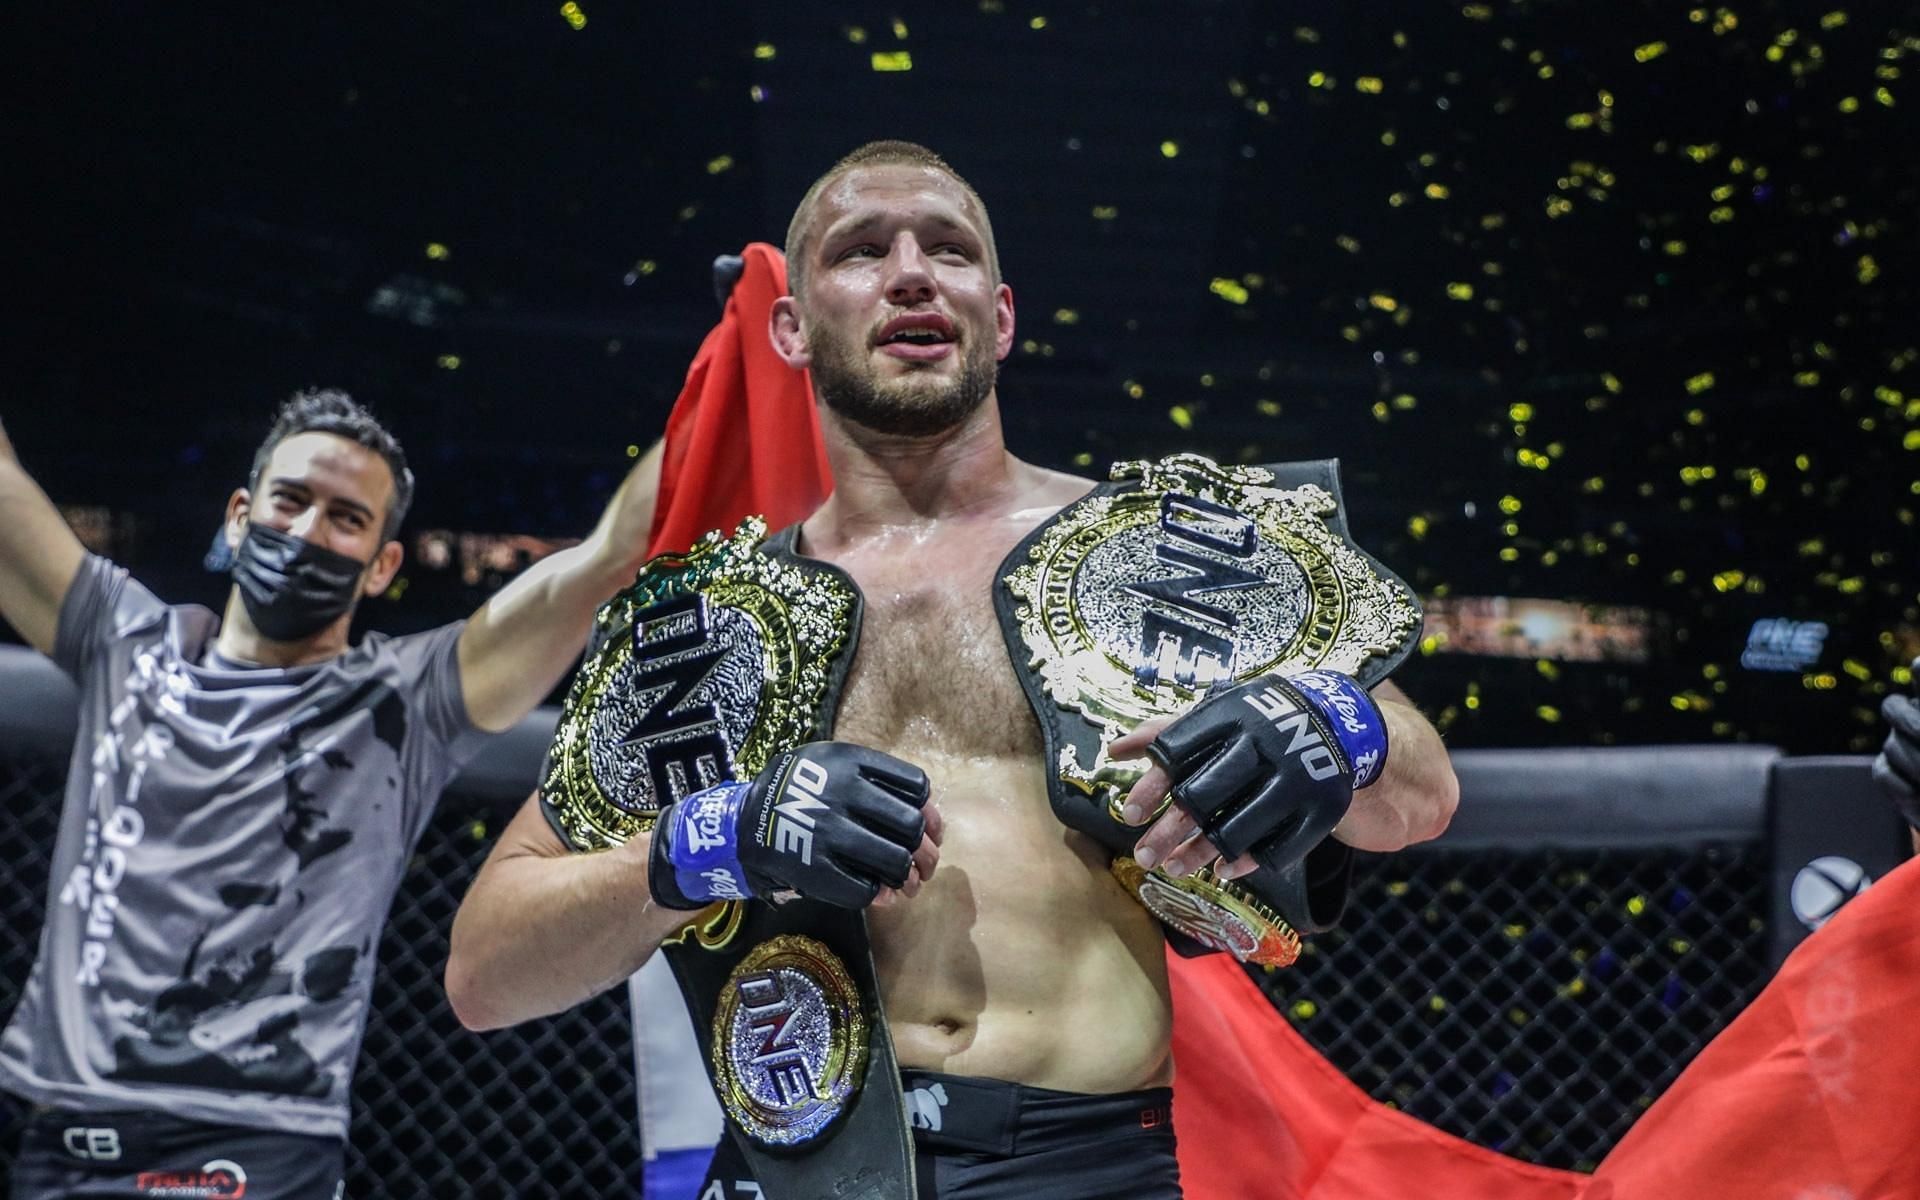 Reinier de Ridder became a ONE Championship double champ in less than a week&#039;s notice. (Image courtesy of ONE Championship)